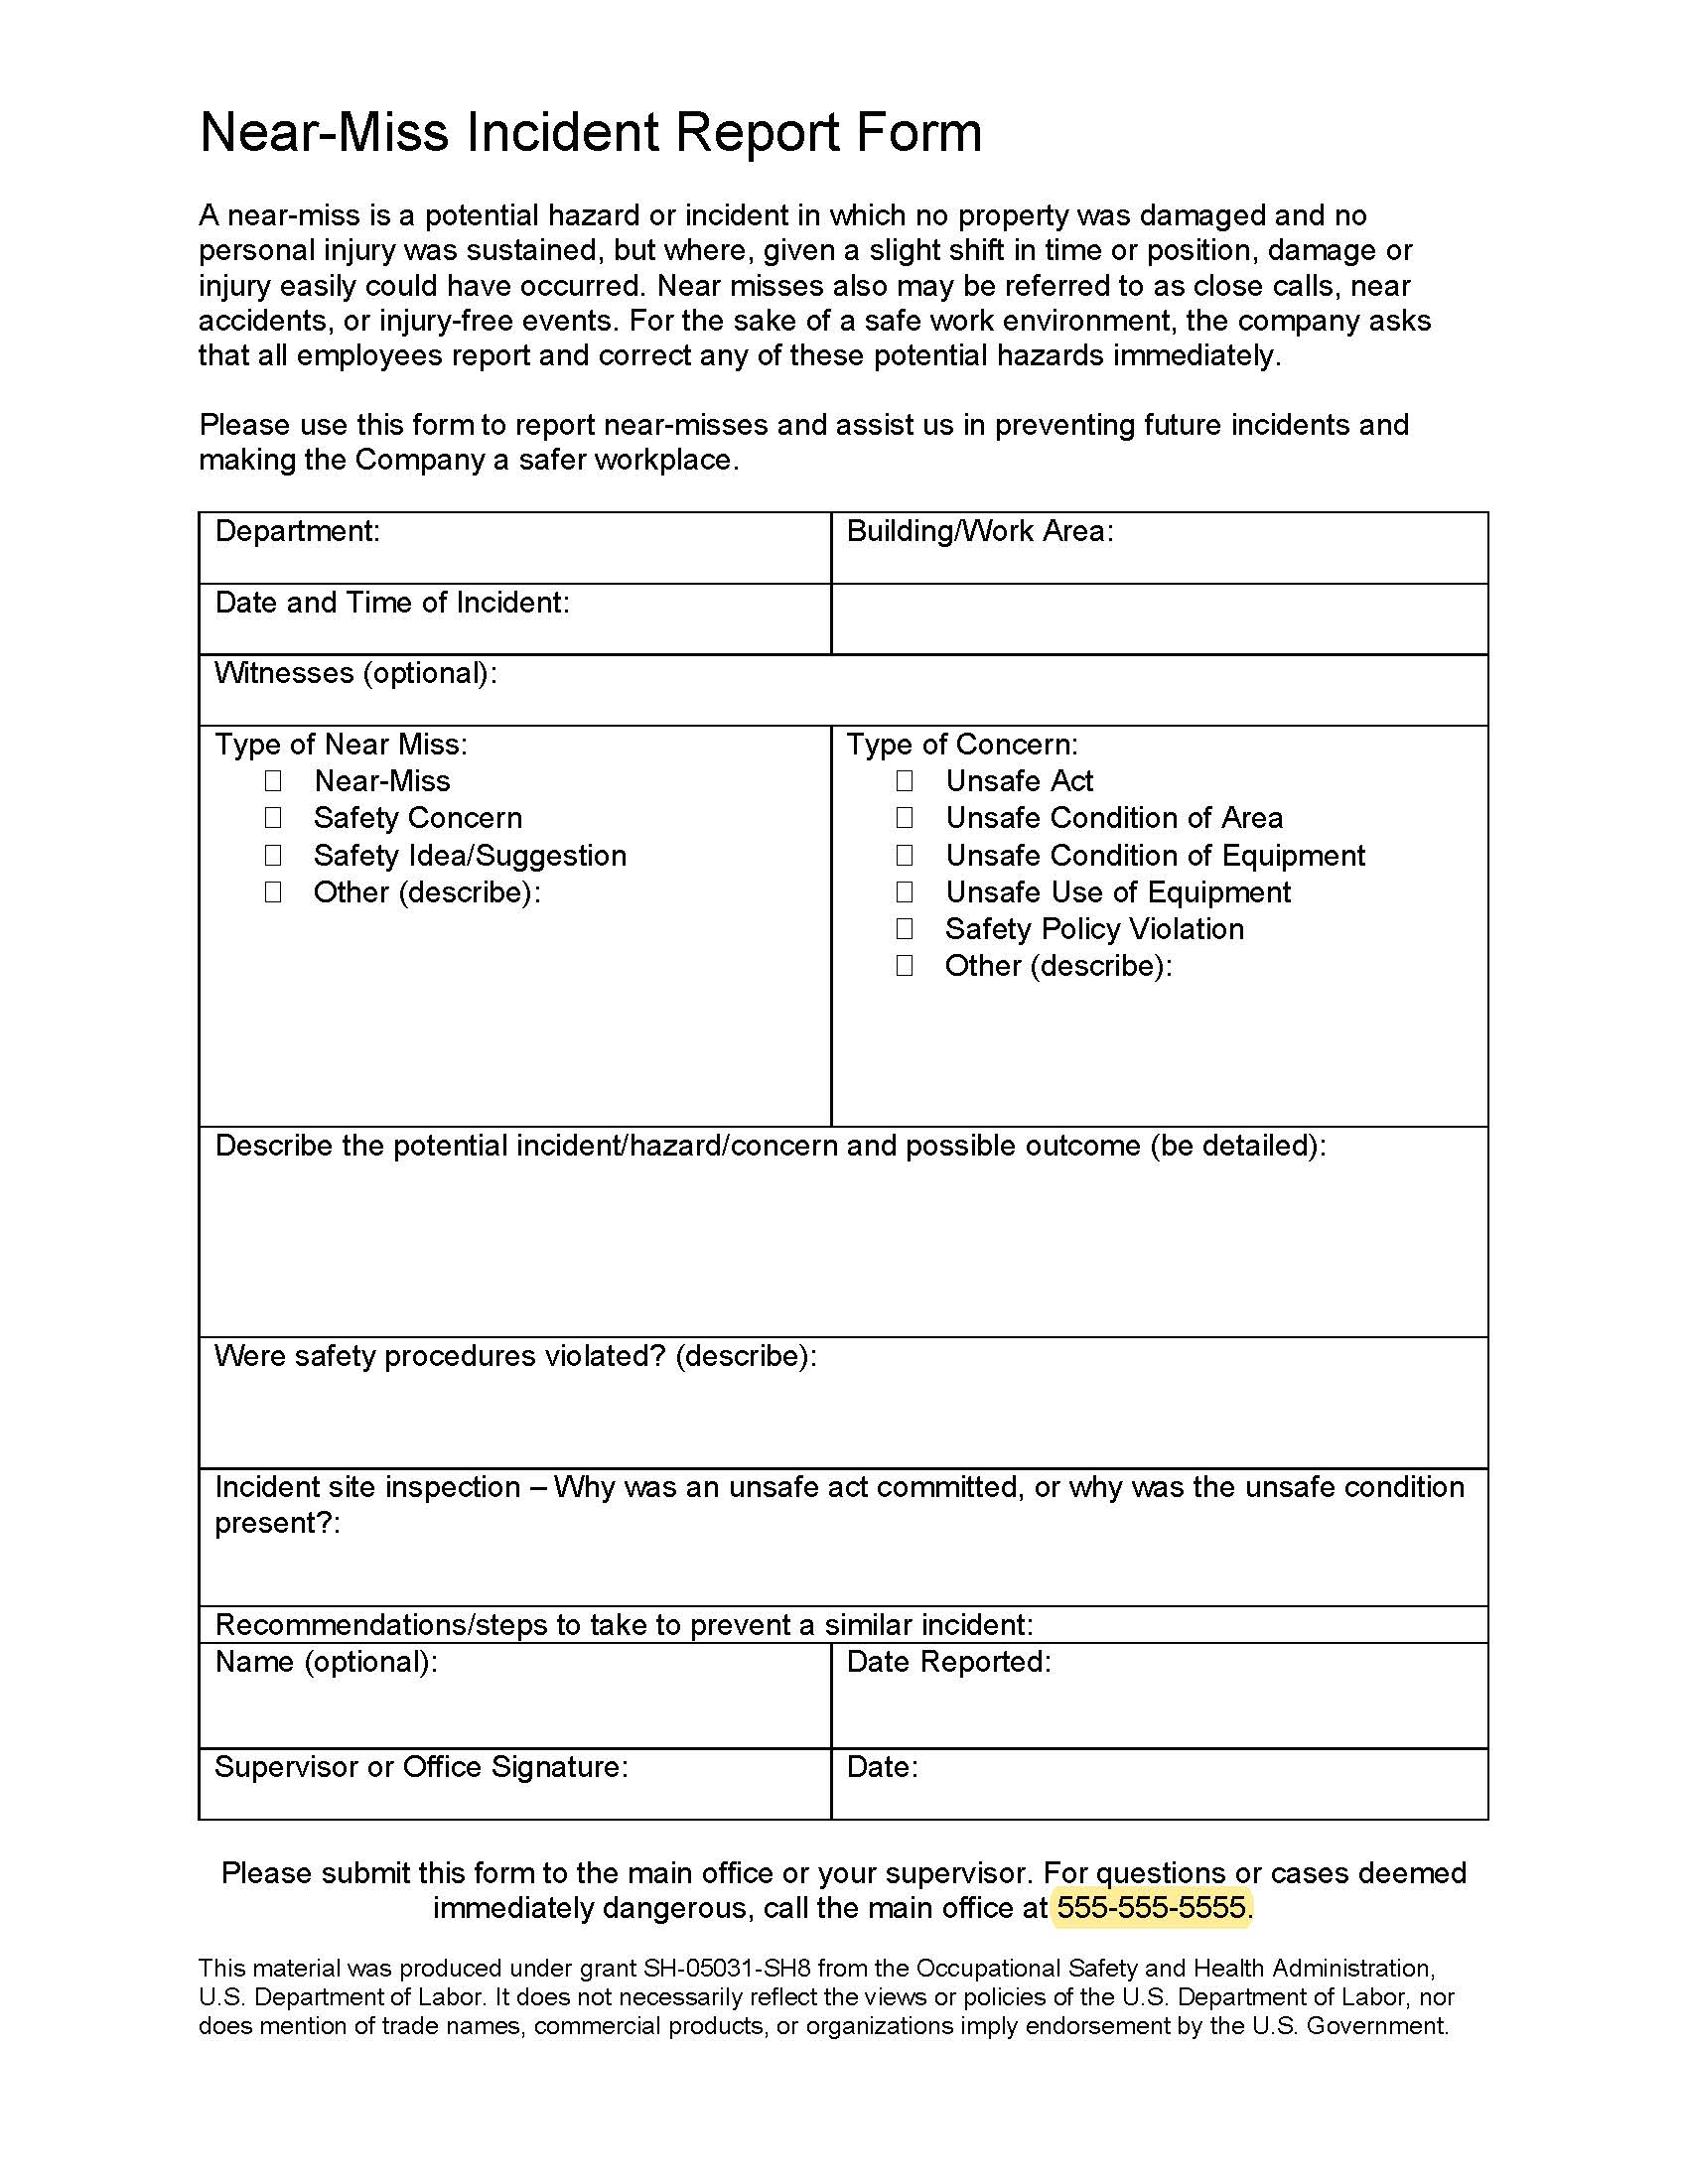 Sample near-miss reporting form